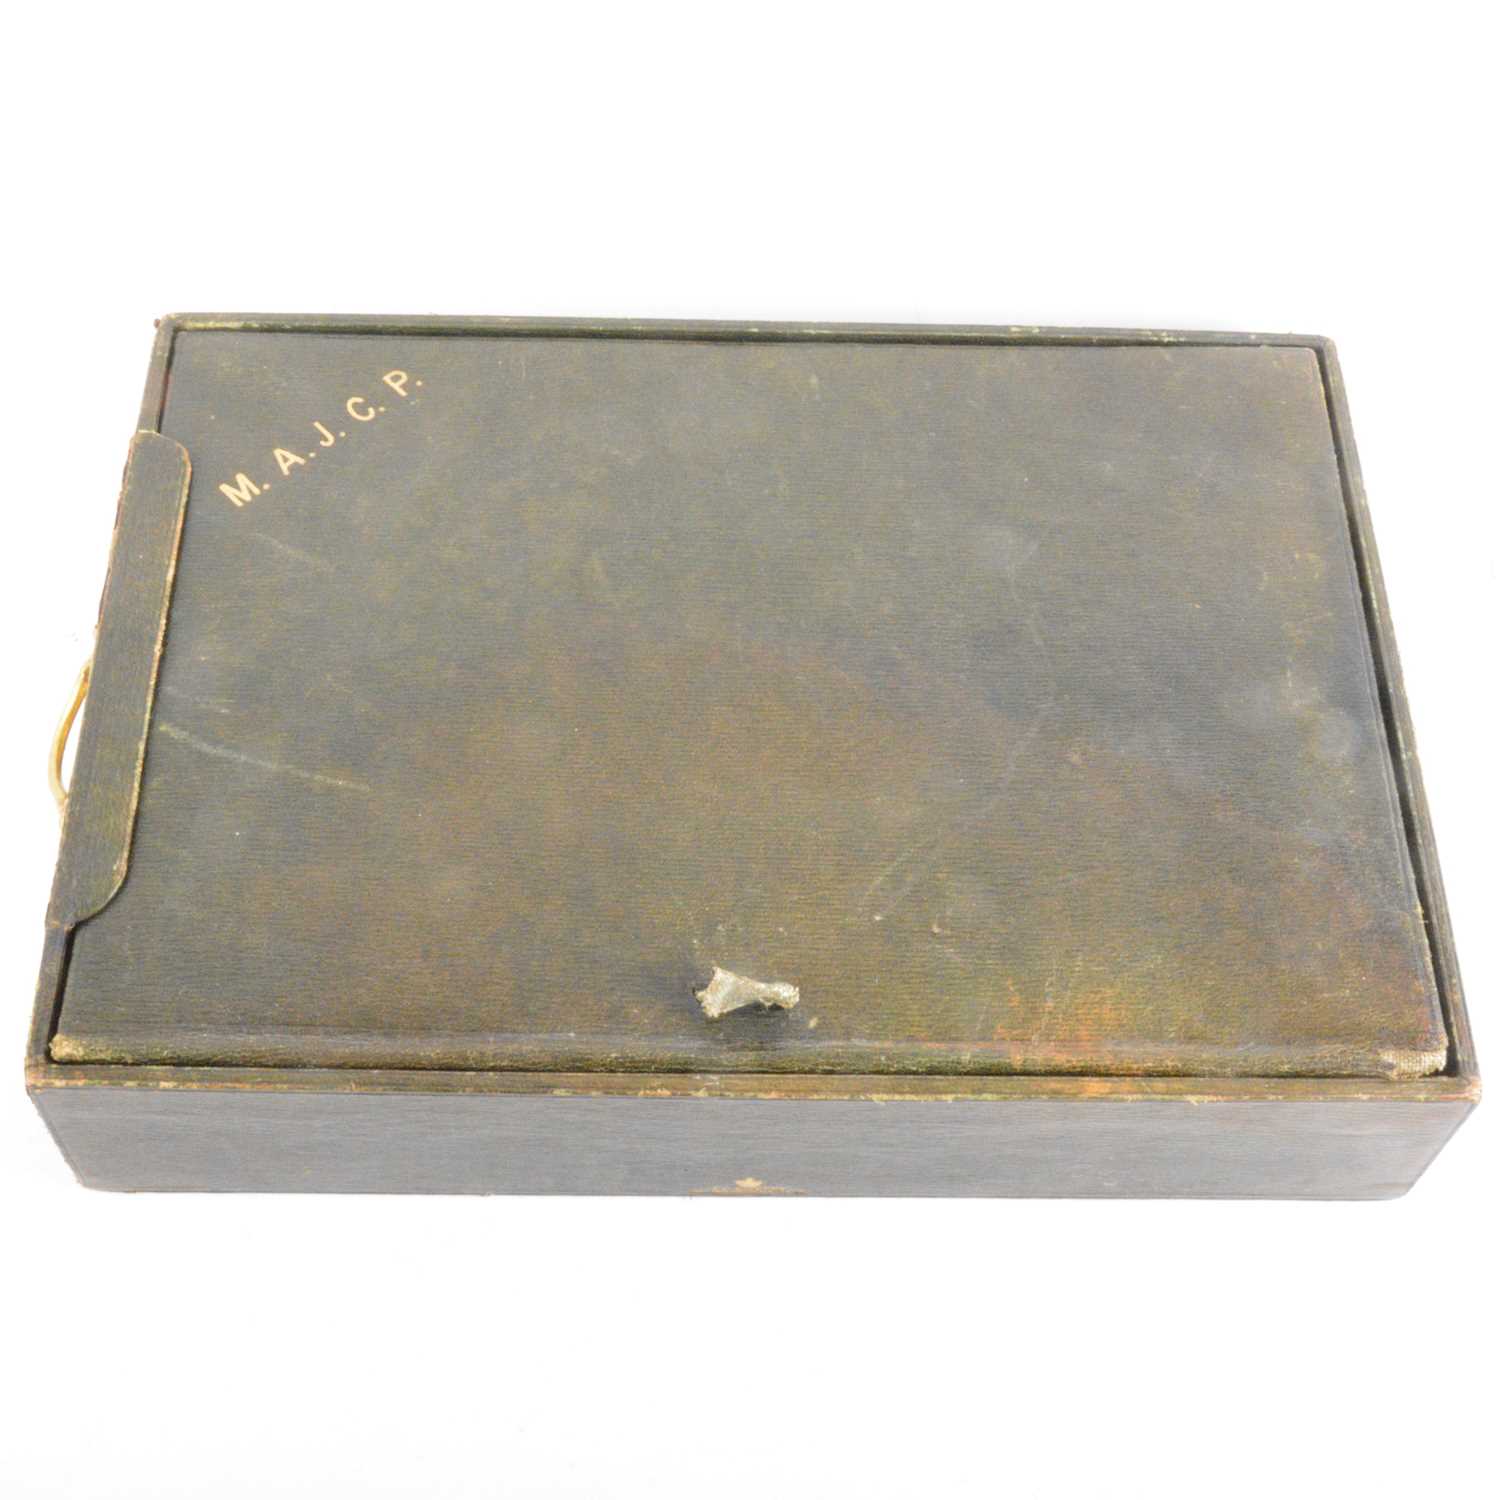 Lot 130 - A green Morocco document tray, by J C Vickery, London